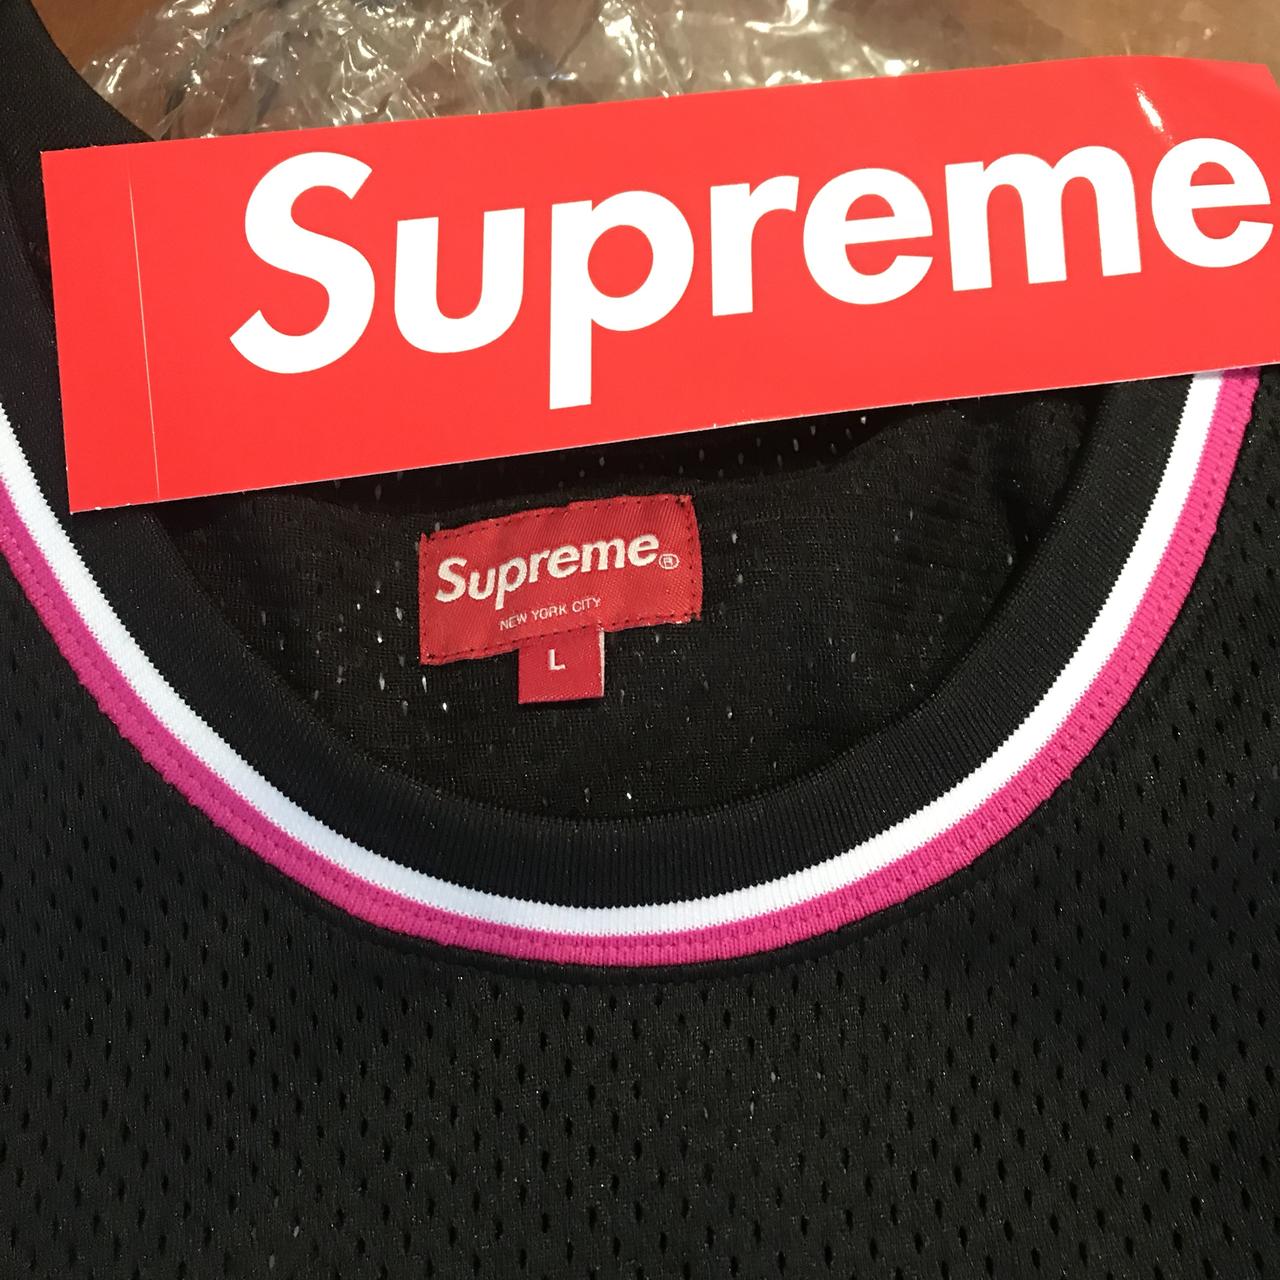 Supreme basketball jersey Brand new blue and red/ - Depop